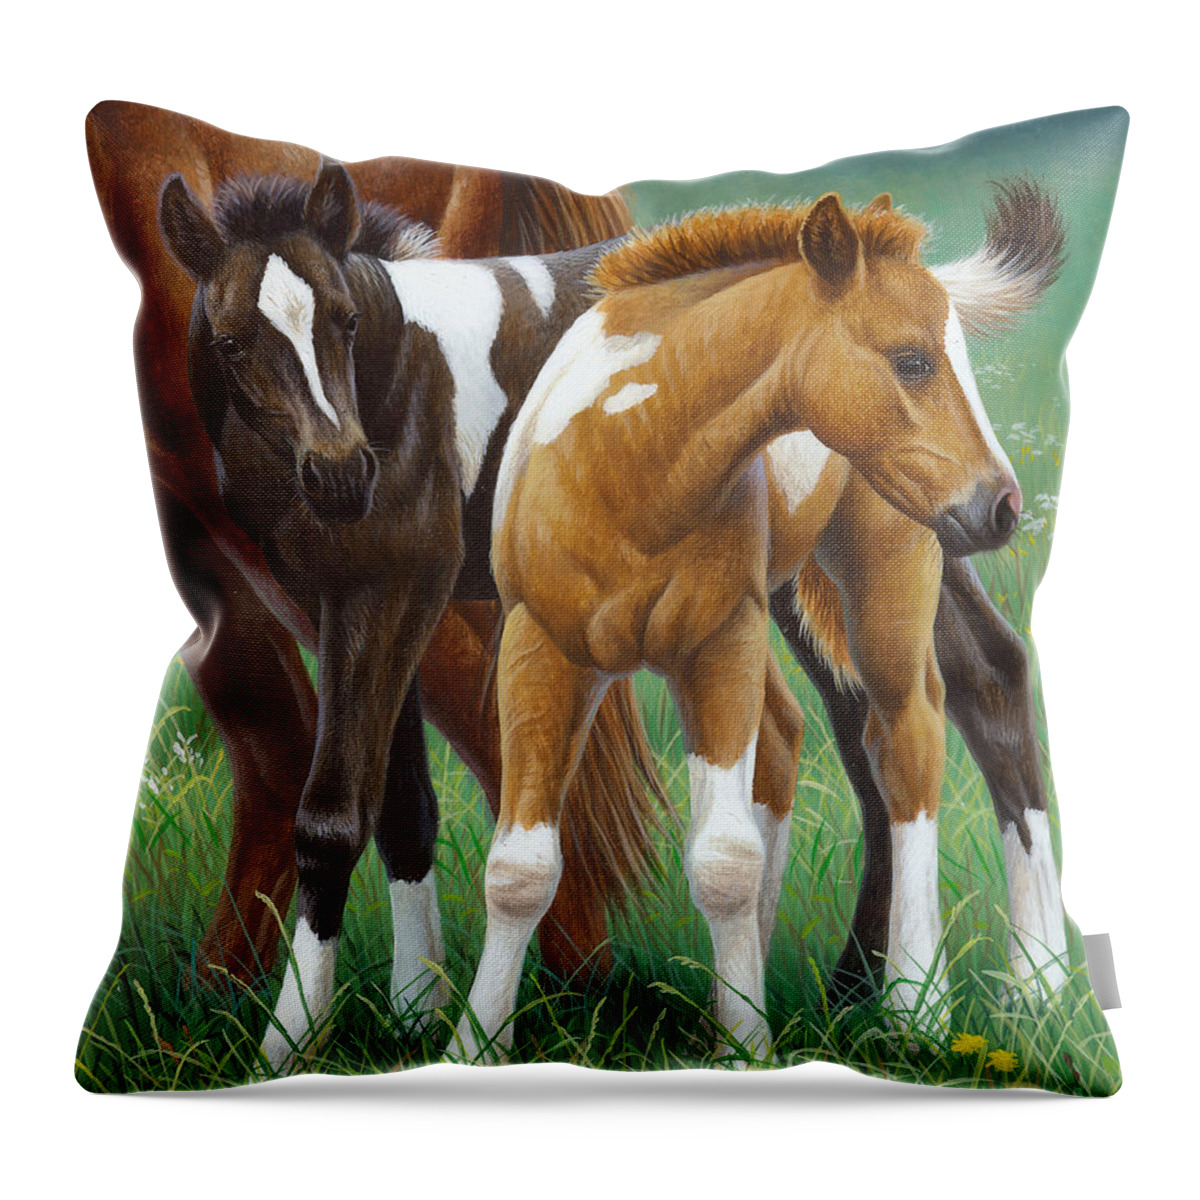 Cynthie Fisher Throw Pillow featuring the painting Two Foals, Horses by Cynthie Fisher